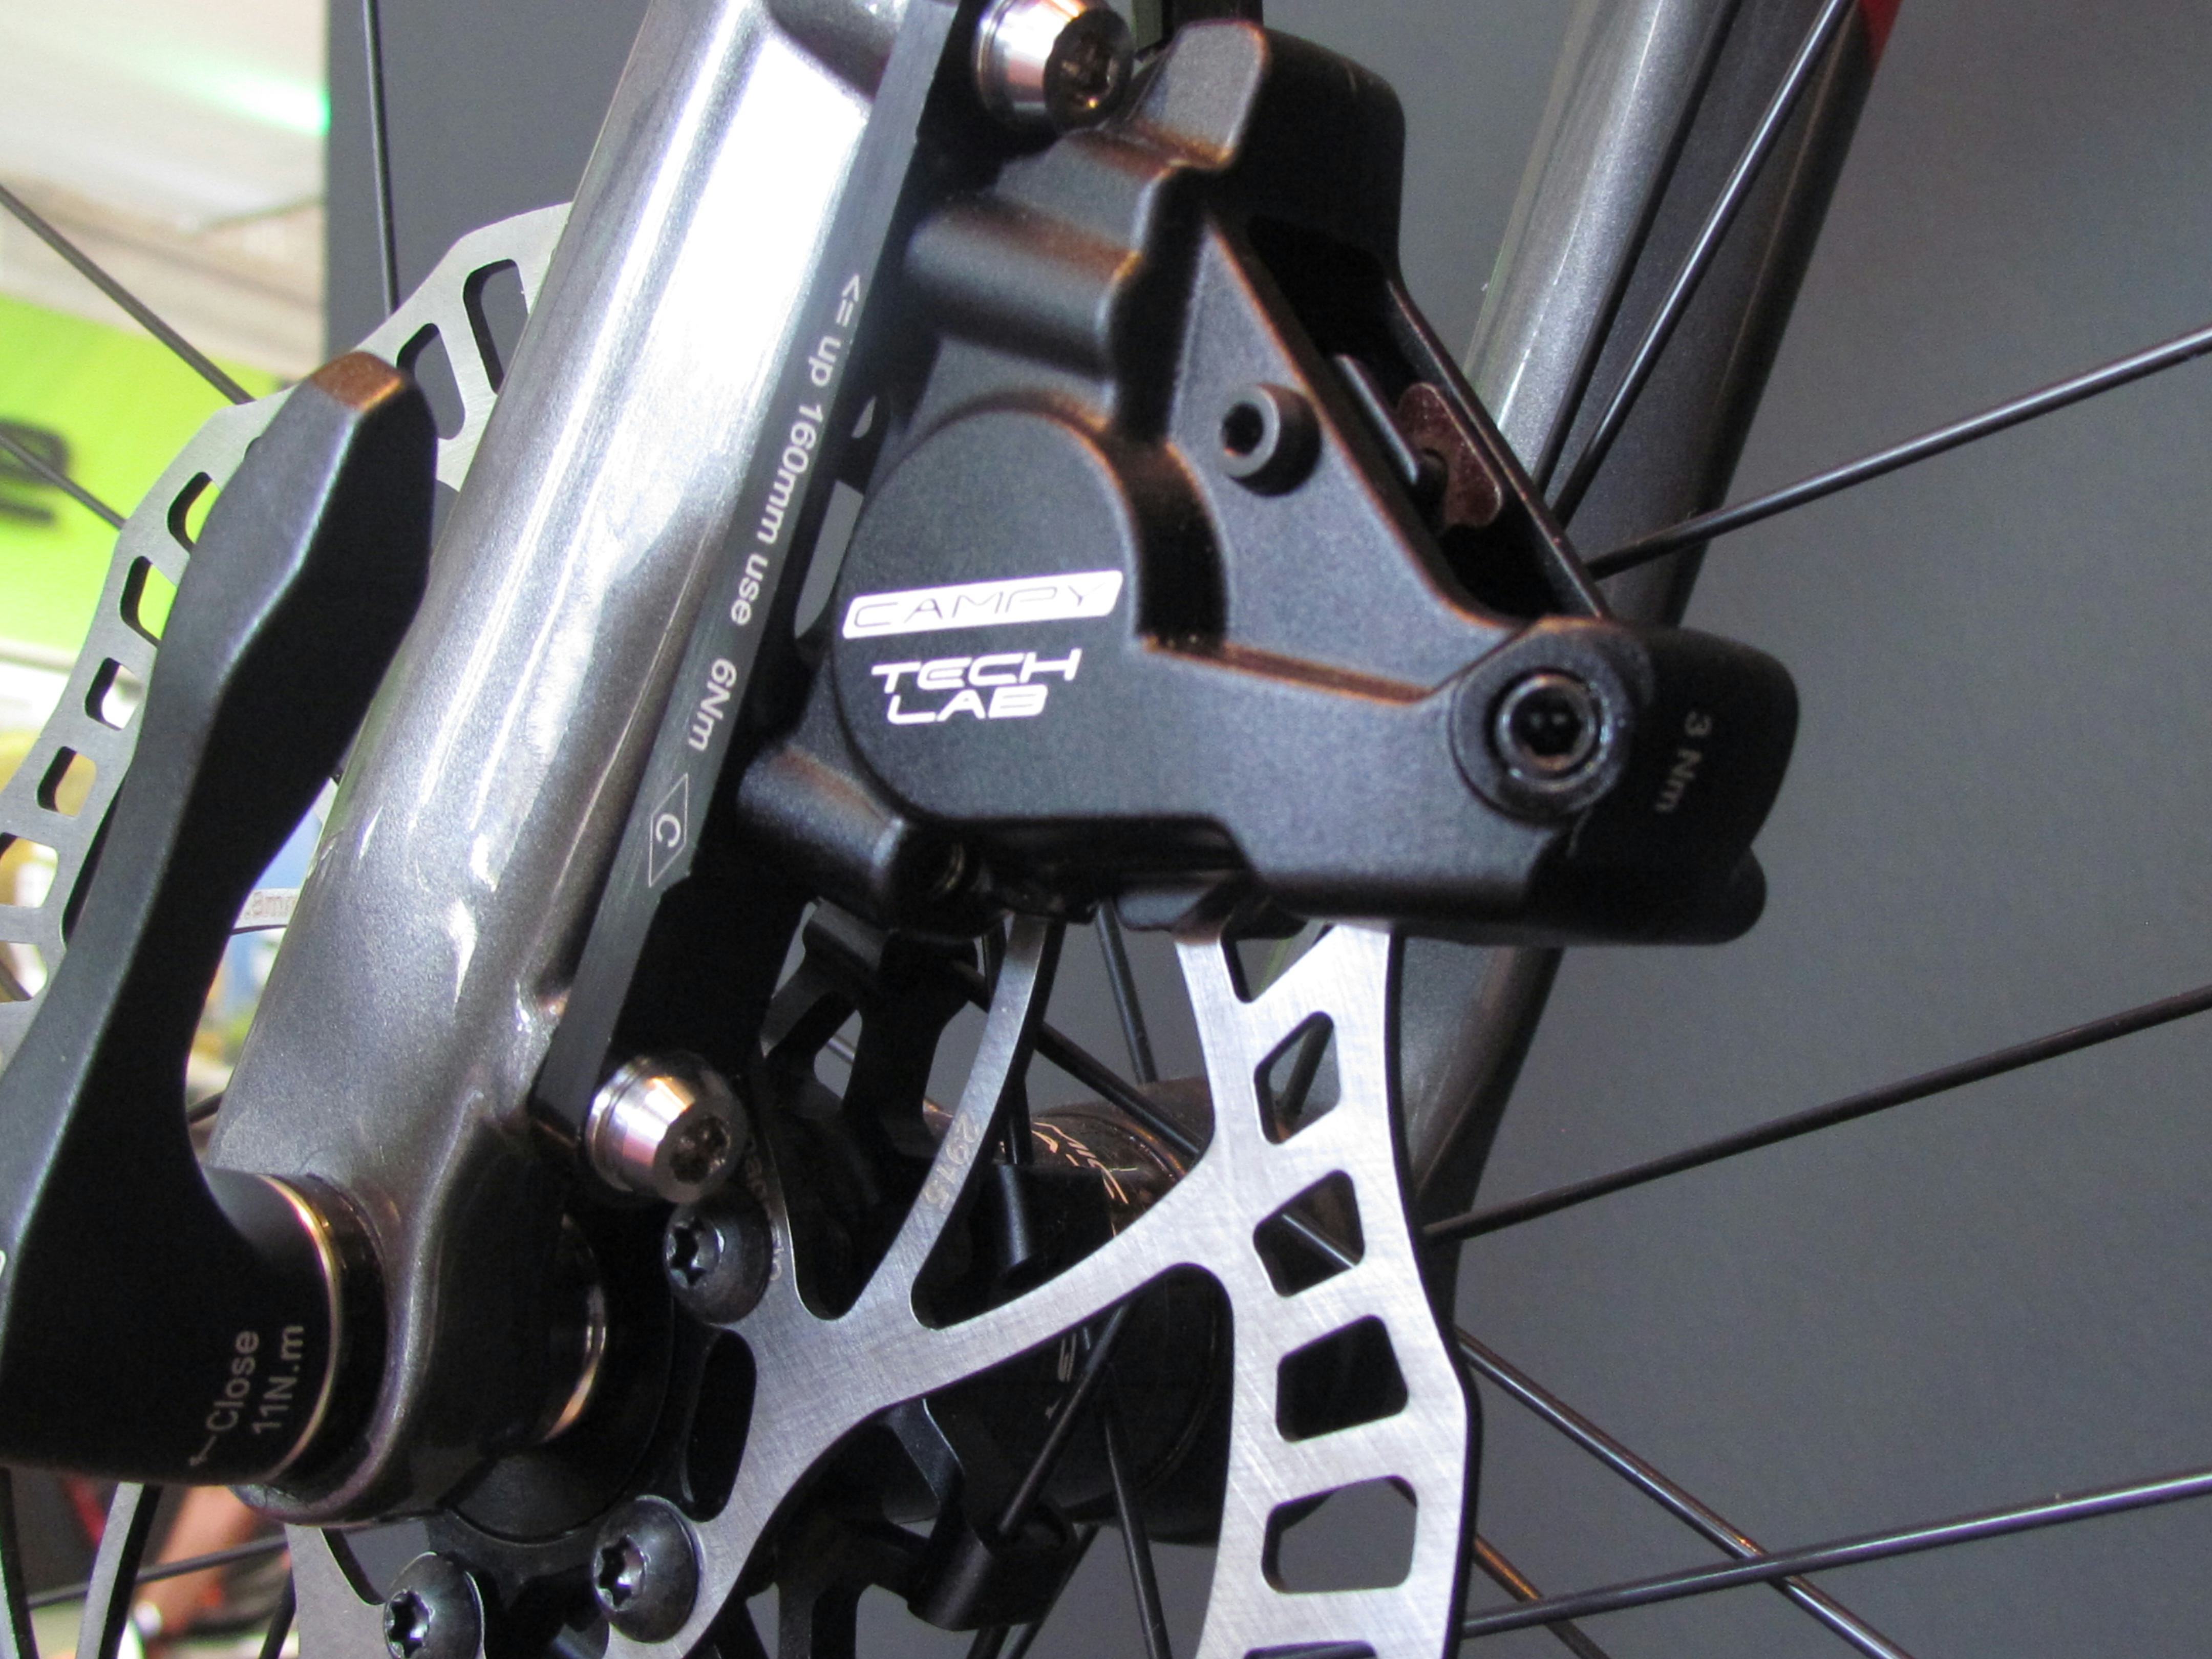 The UCI is not planning to resume allowing disc brake use in the peloton until the teams agree. – Photo Bike Europe